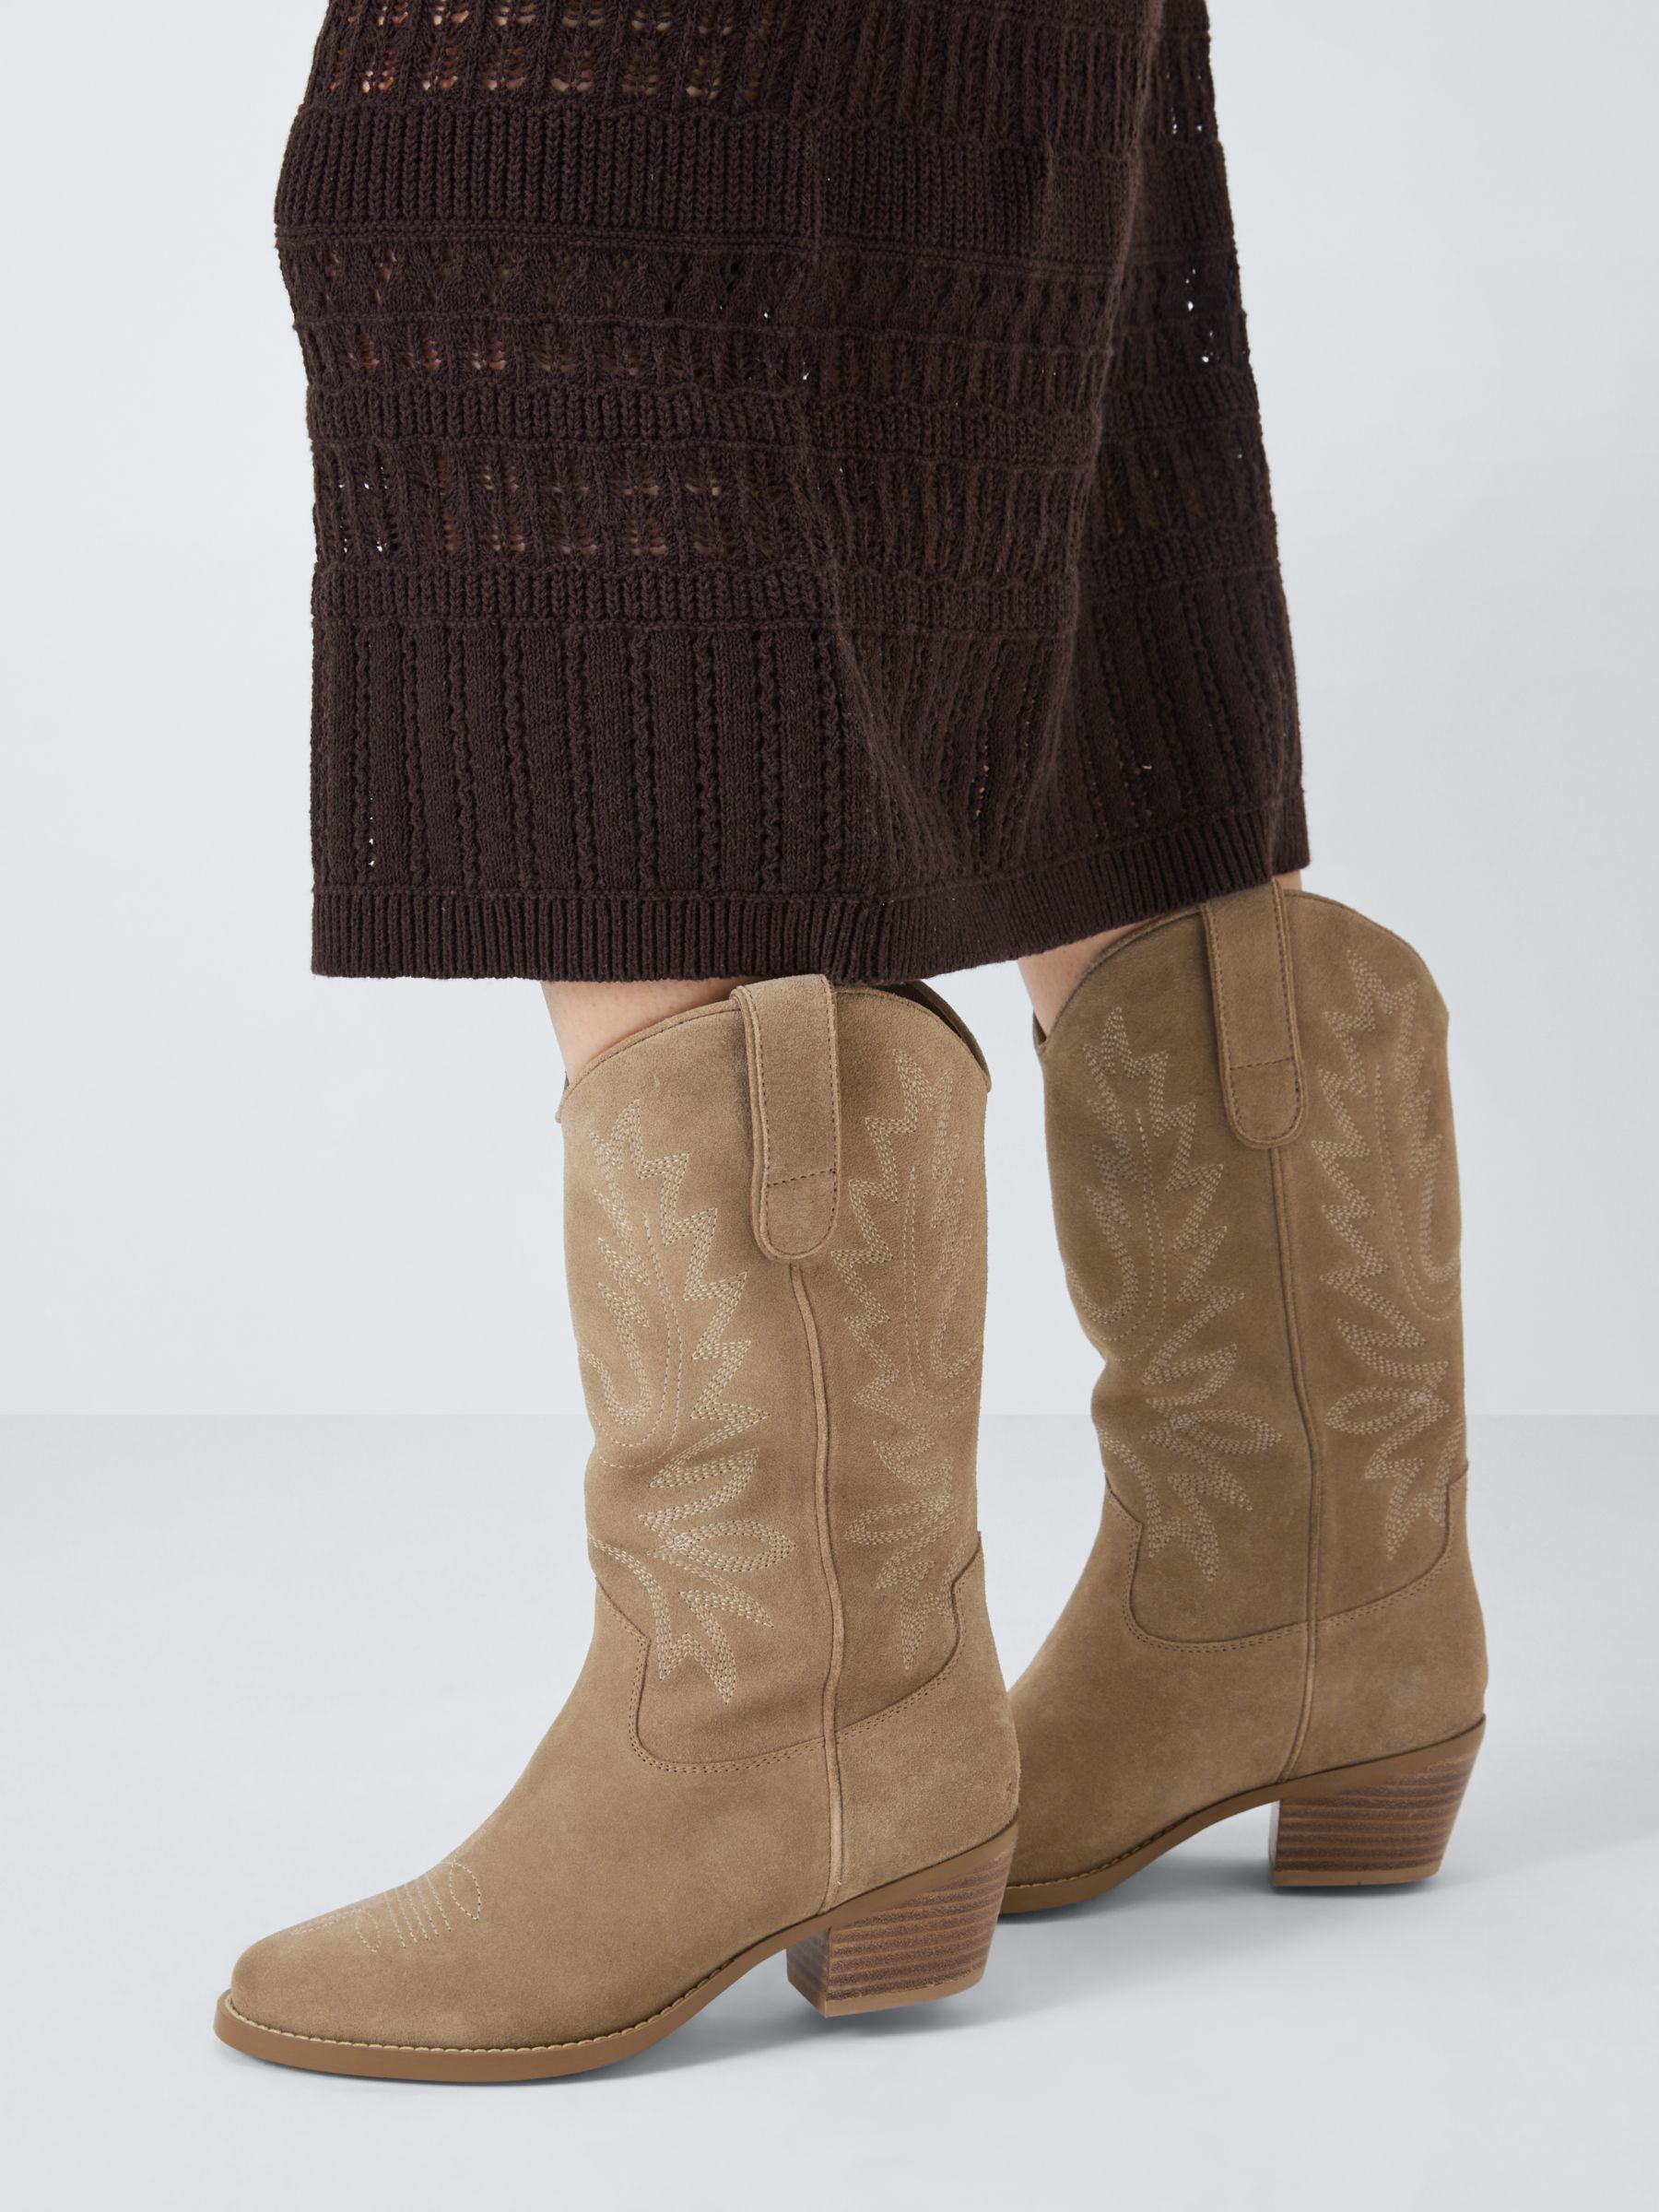 AND/OR Thorn Suede Embroidered Long Western Boots, Sand, 5